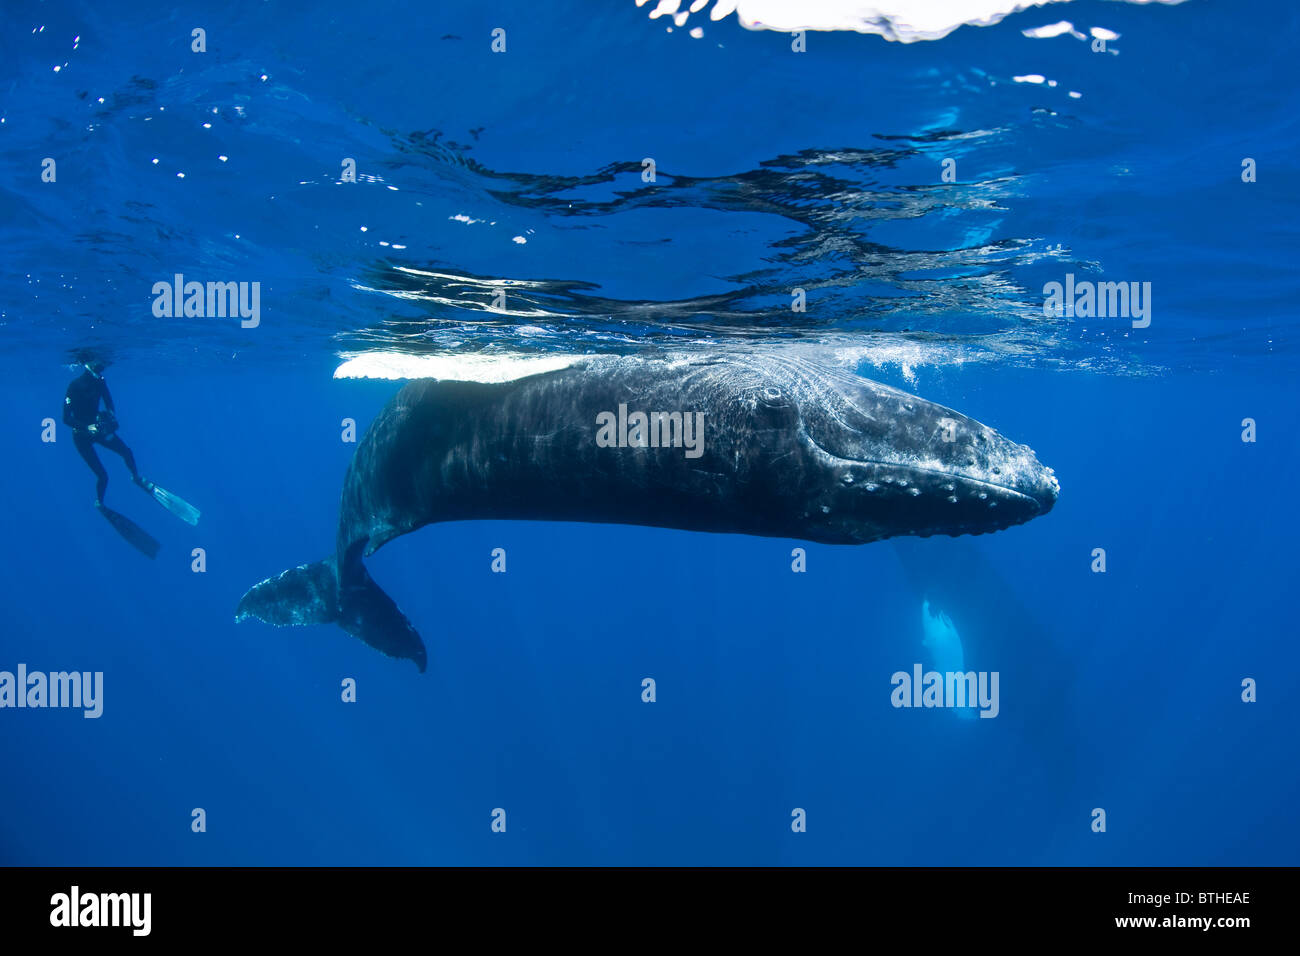 A Humpback whale calf, Megaptera novaeangliae, plays at the surface while a snorkeler watches several meters away. Stock Photo